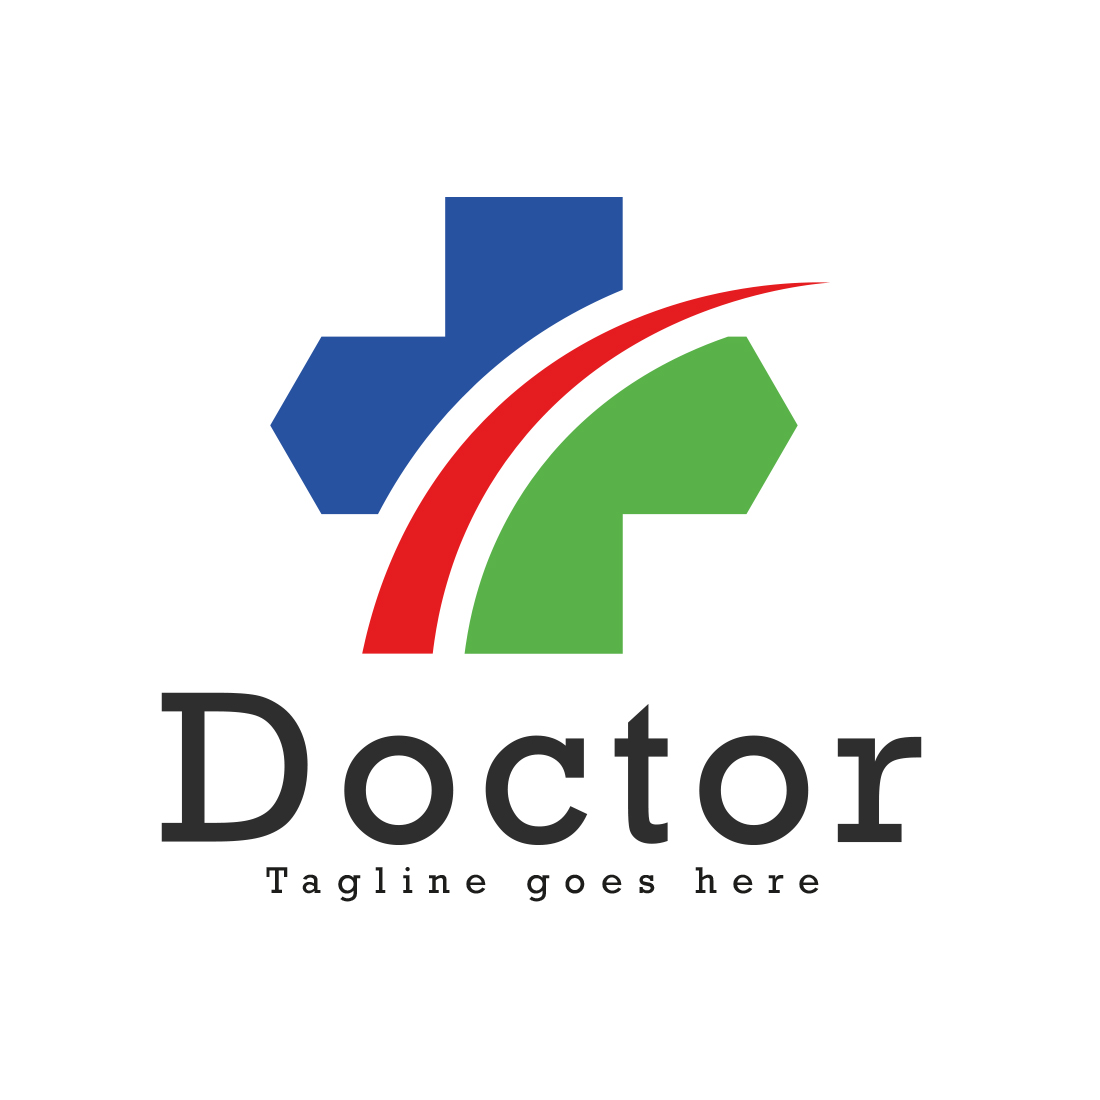 Logo design for doctor clinic and related businesses cover image.